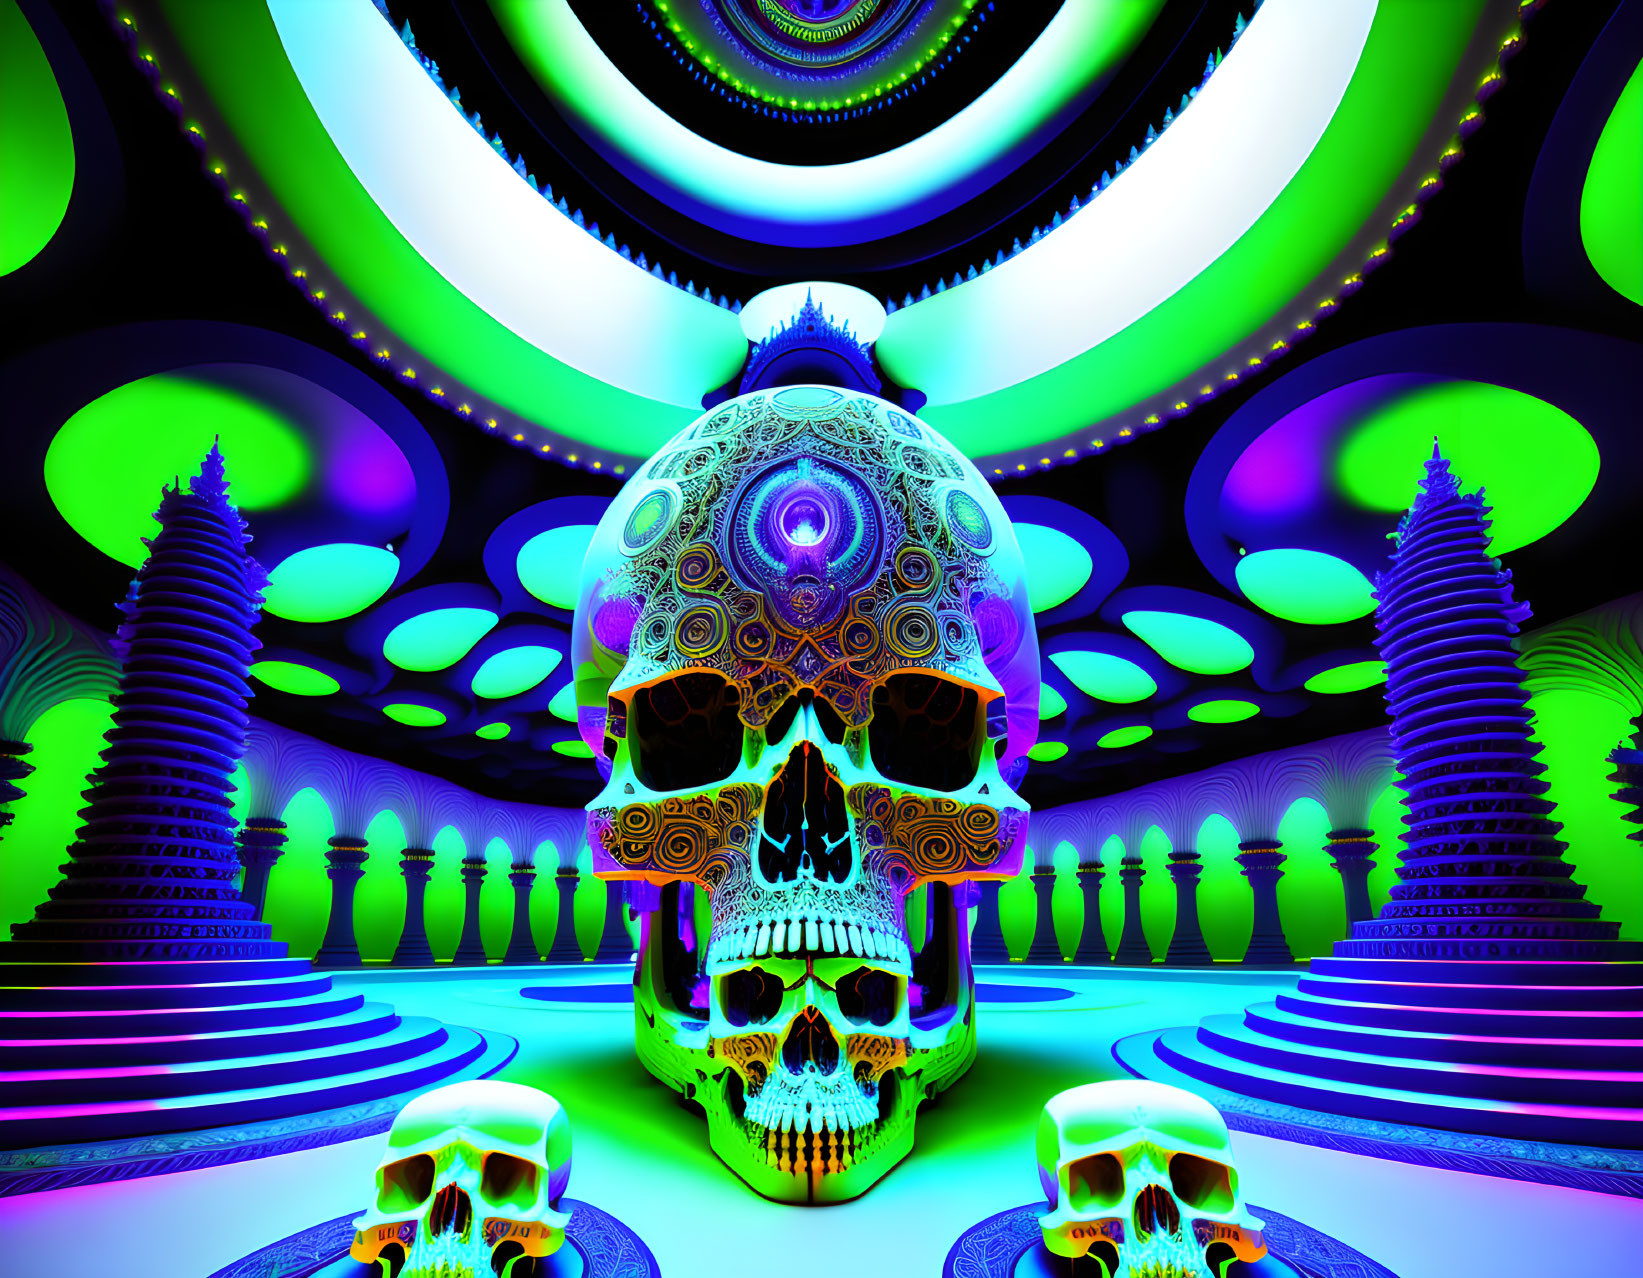 Skulls in an abstract realm of thought